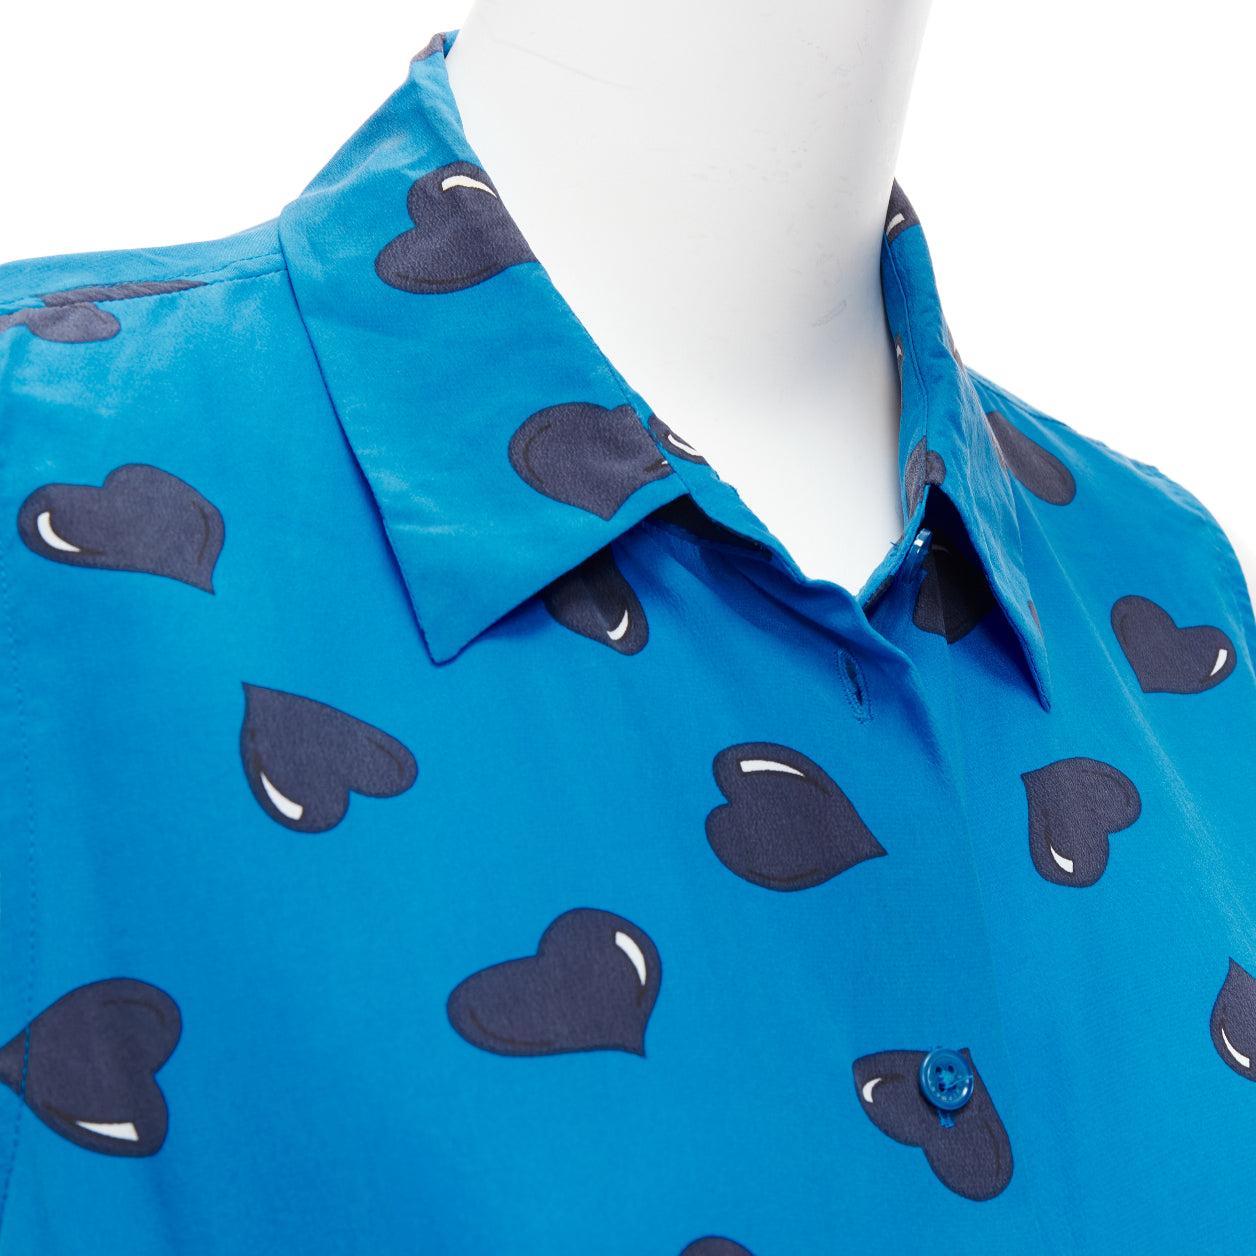 EQUIPMENT 100% silk electric blue black heart printed sleeveless blouse M
Reference: DYTG/A00026
Brand: Equipment
Material: Silk
Color: Blue, Black
Pattern: Heart
Closure: Button
Made in: China

CONDITION:
Condition: Fair, this item was pre-owned